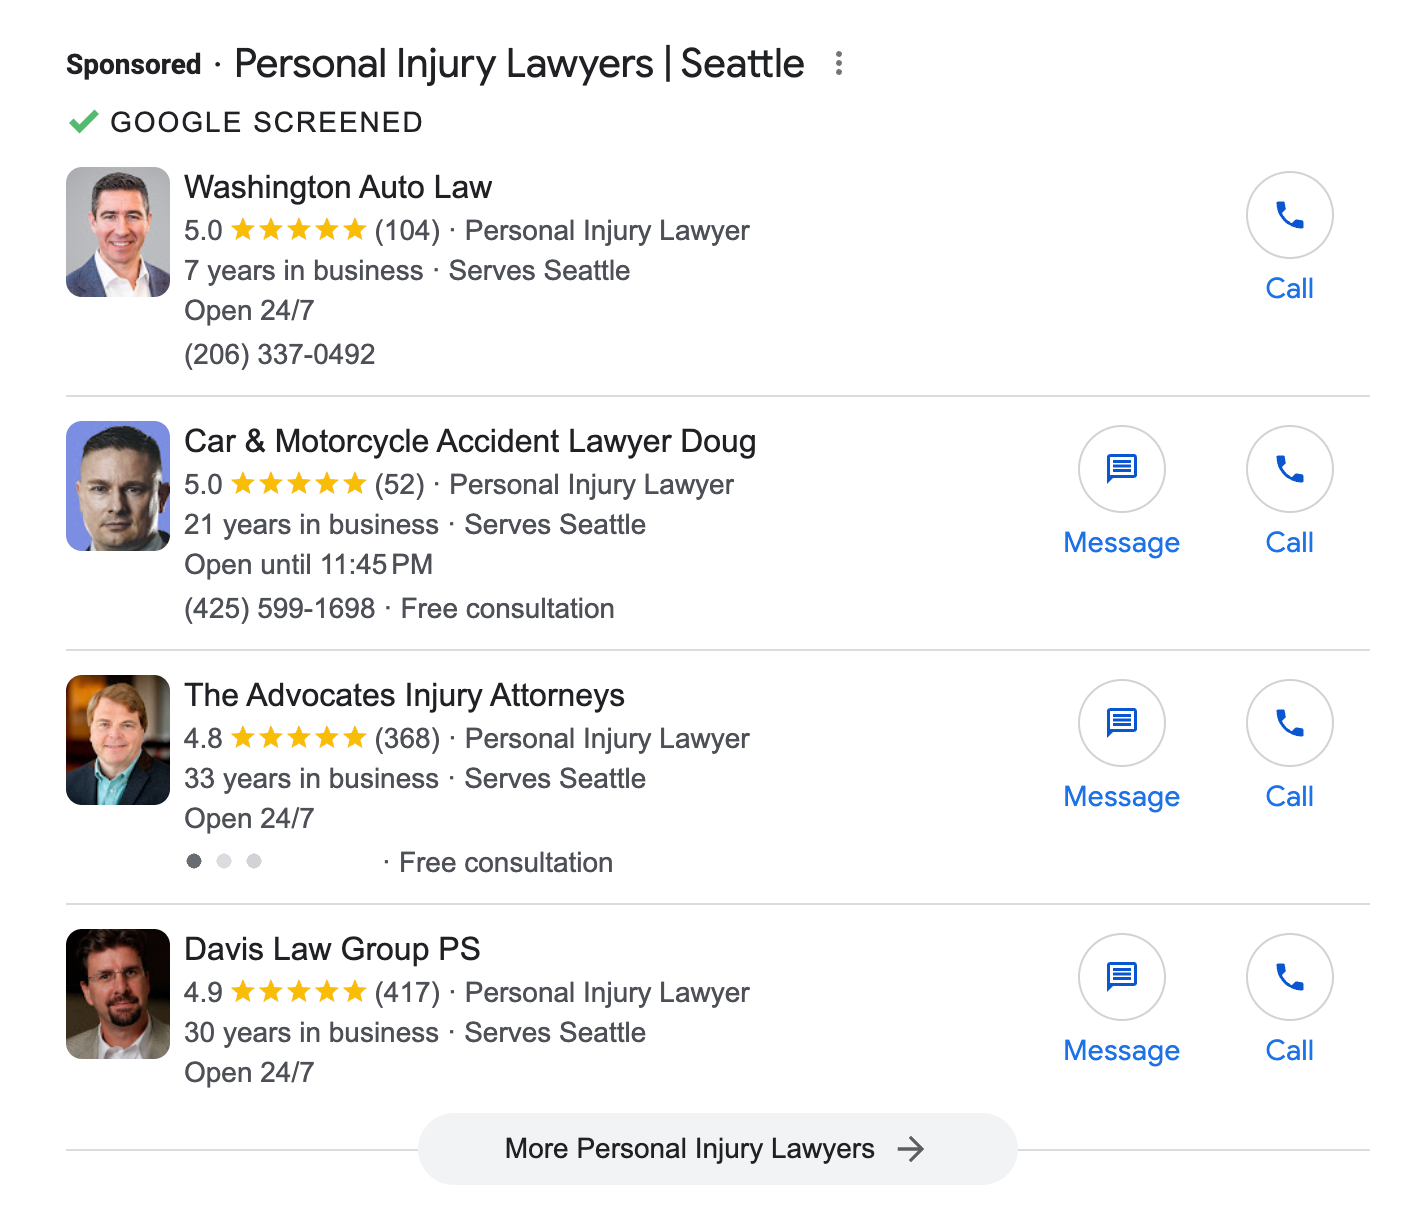 Personal Injury Lawyer Local Services Ads results for Seattle